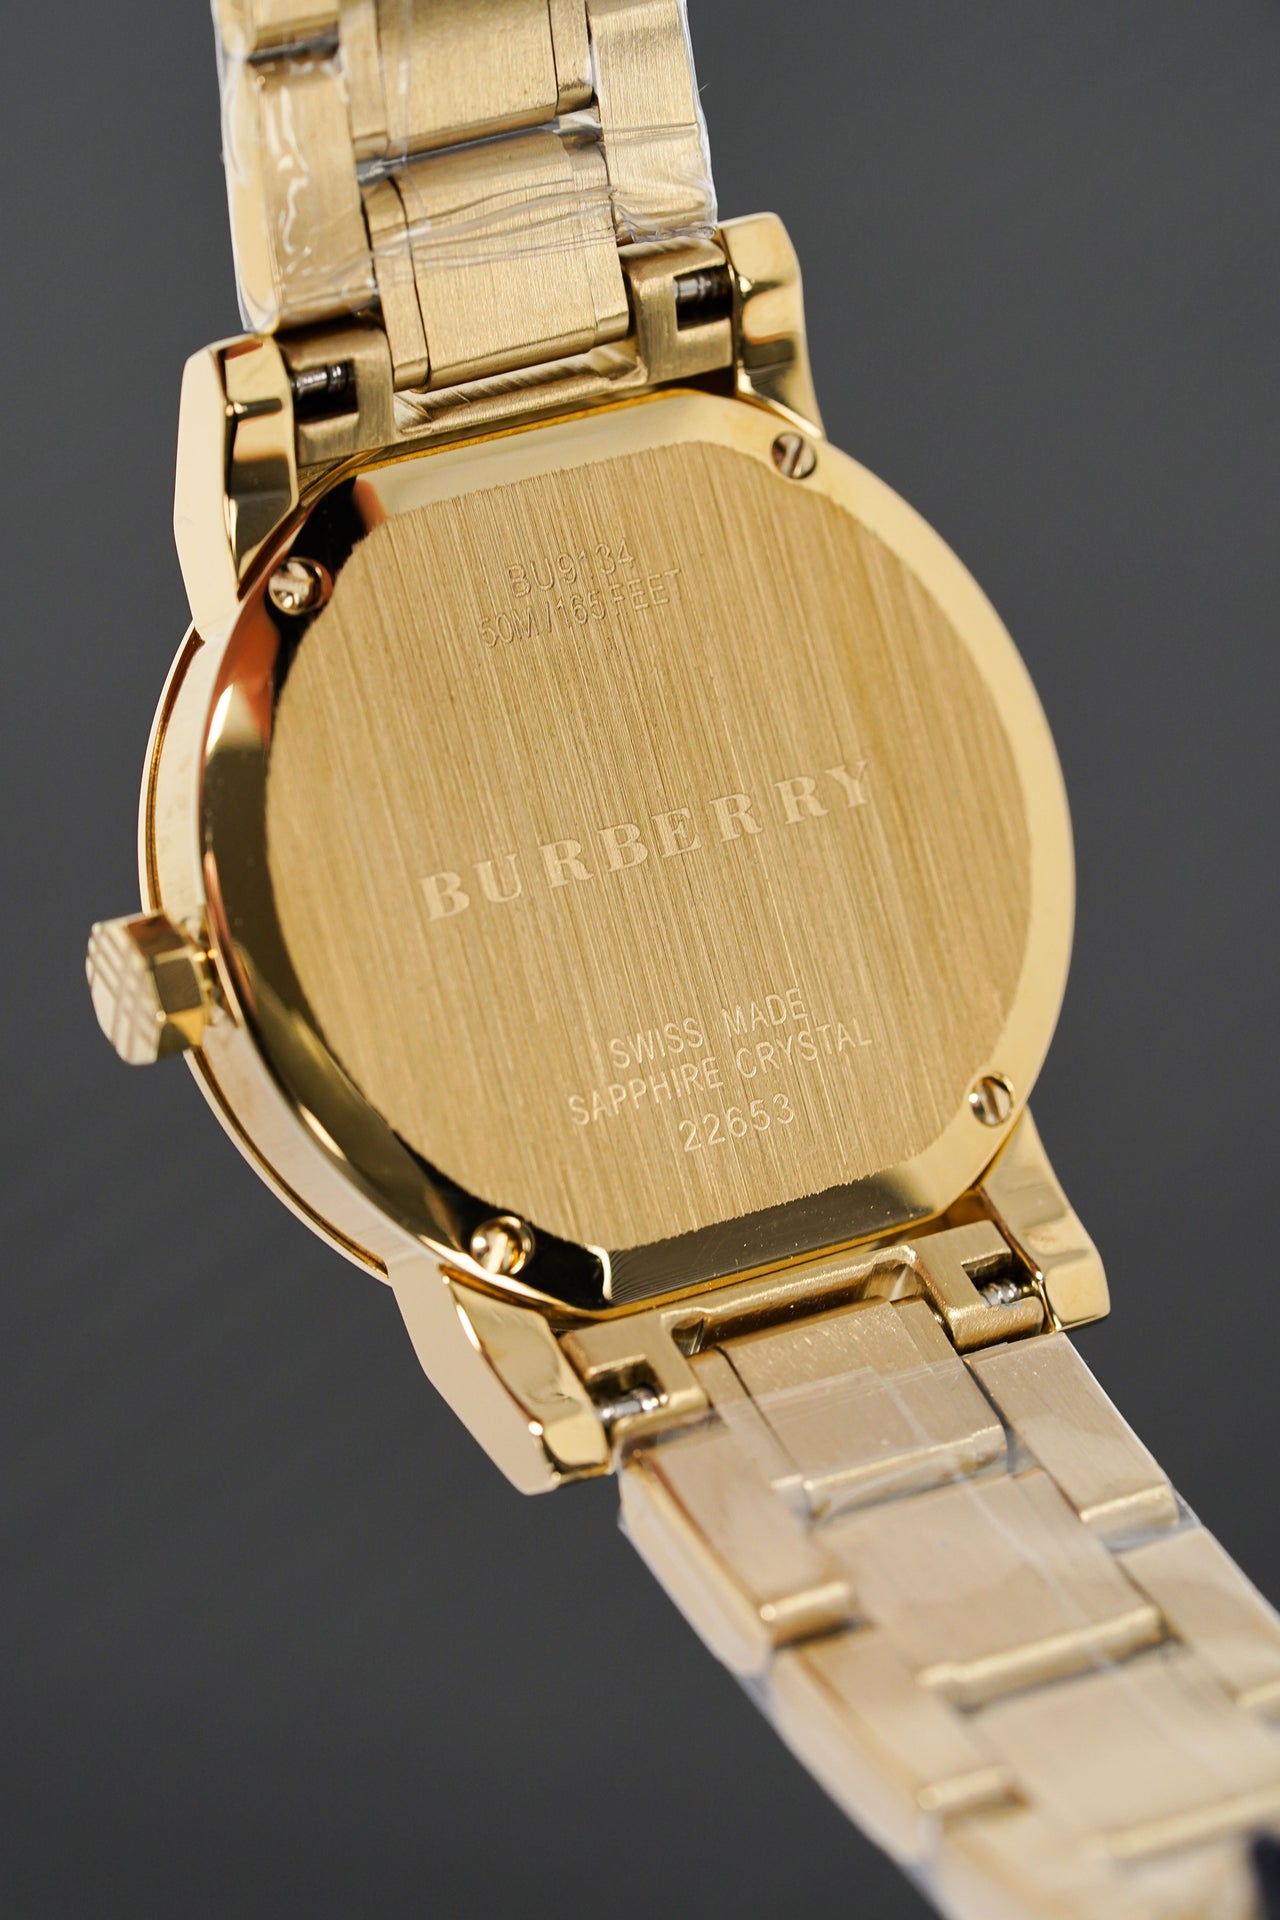 Burberry Ladies Watch The City Champagne Gold BU9134